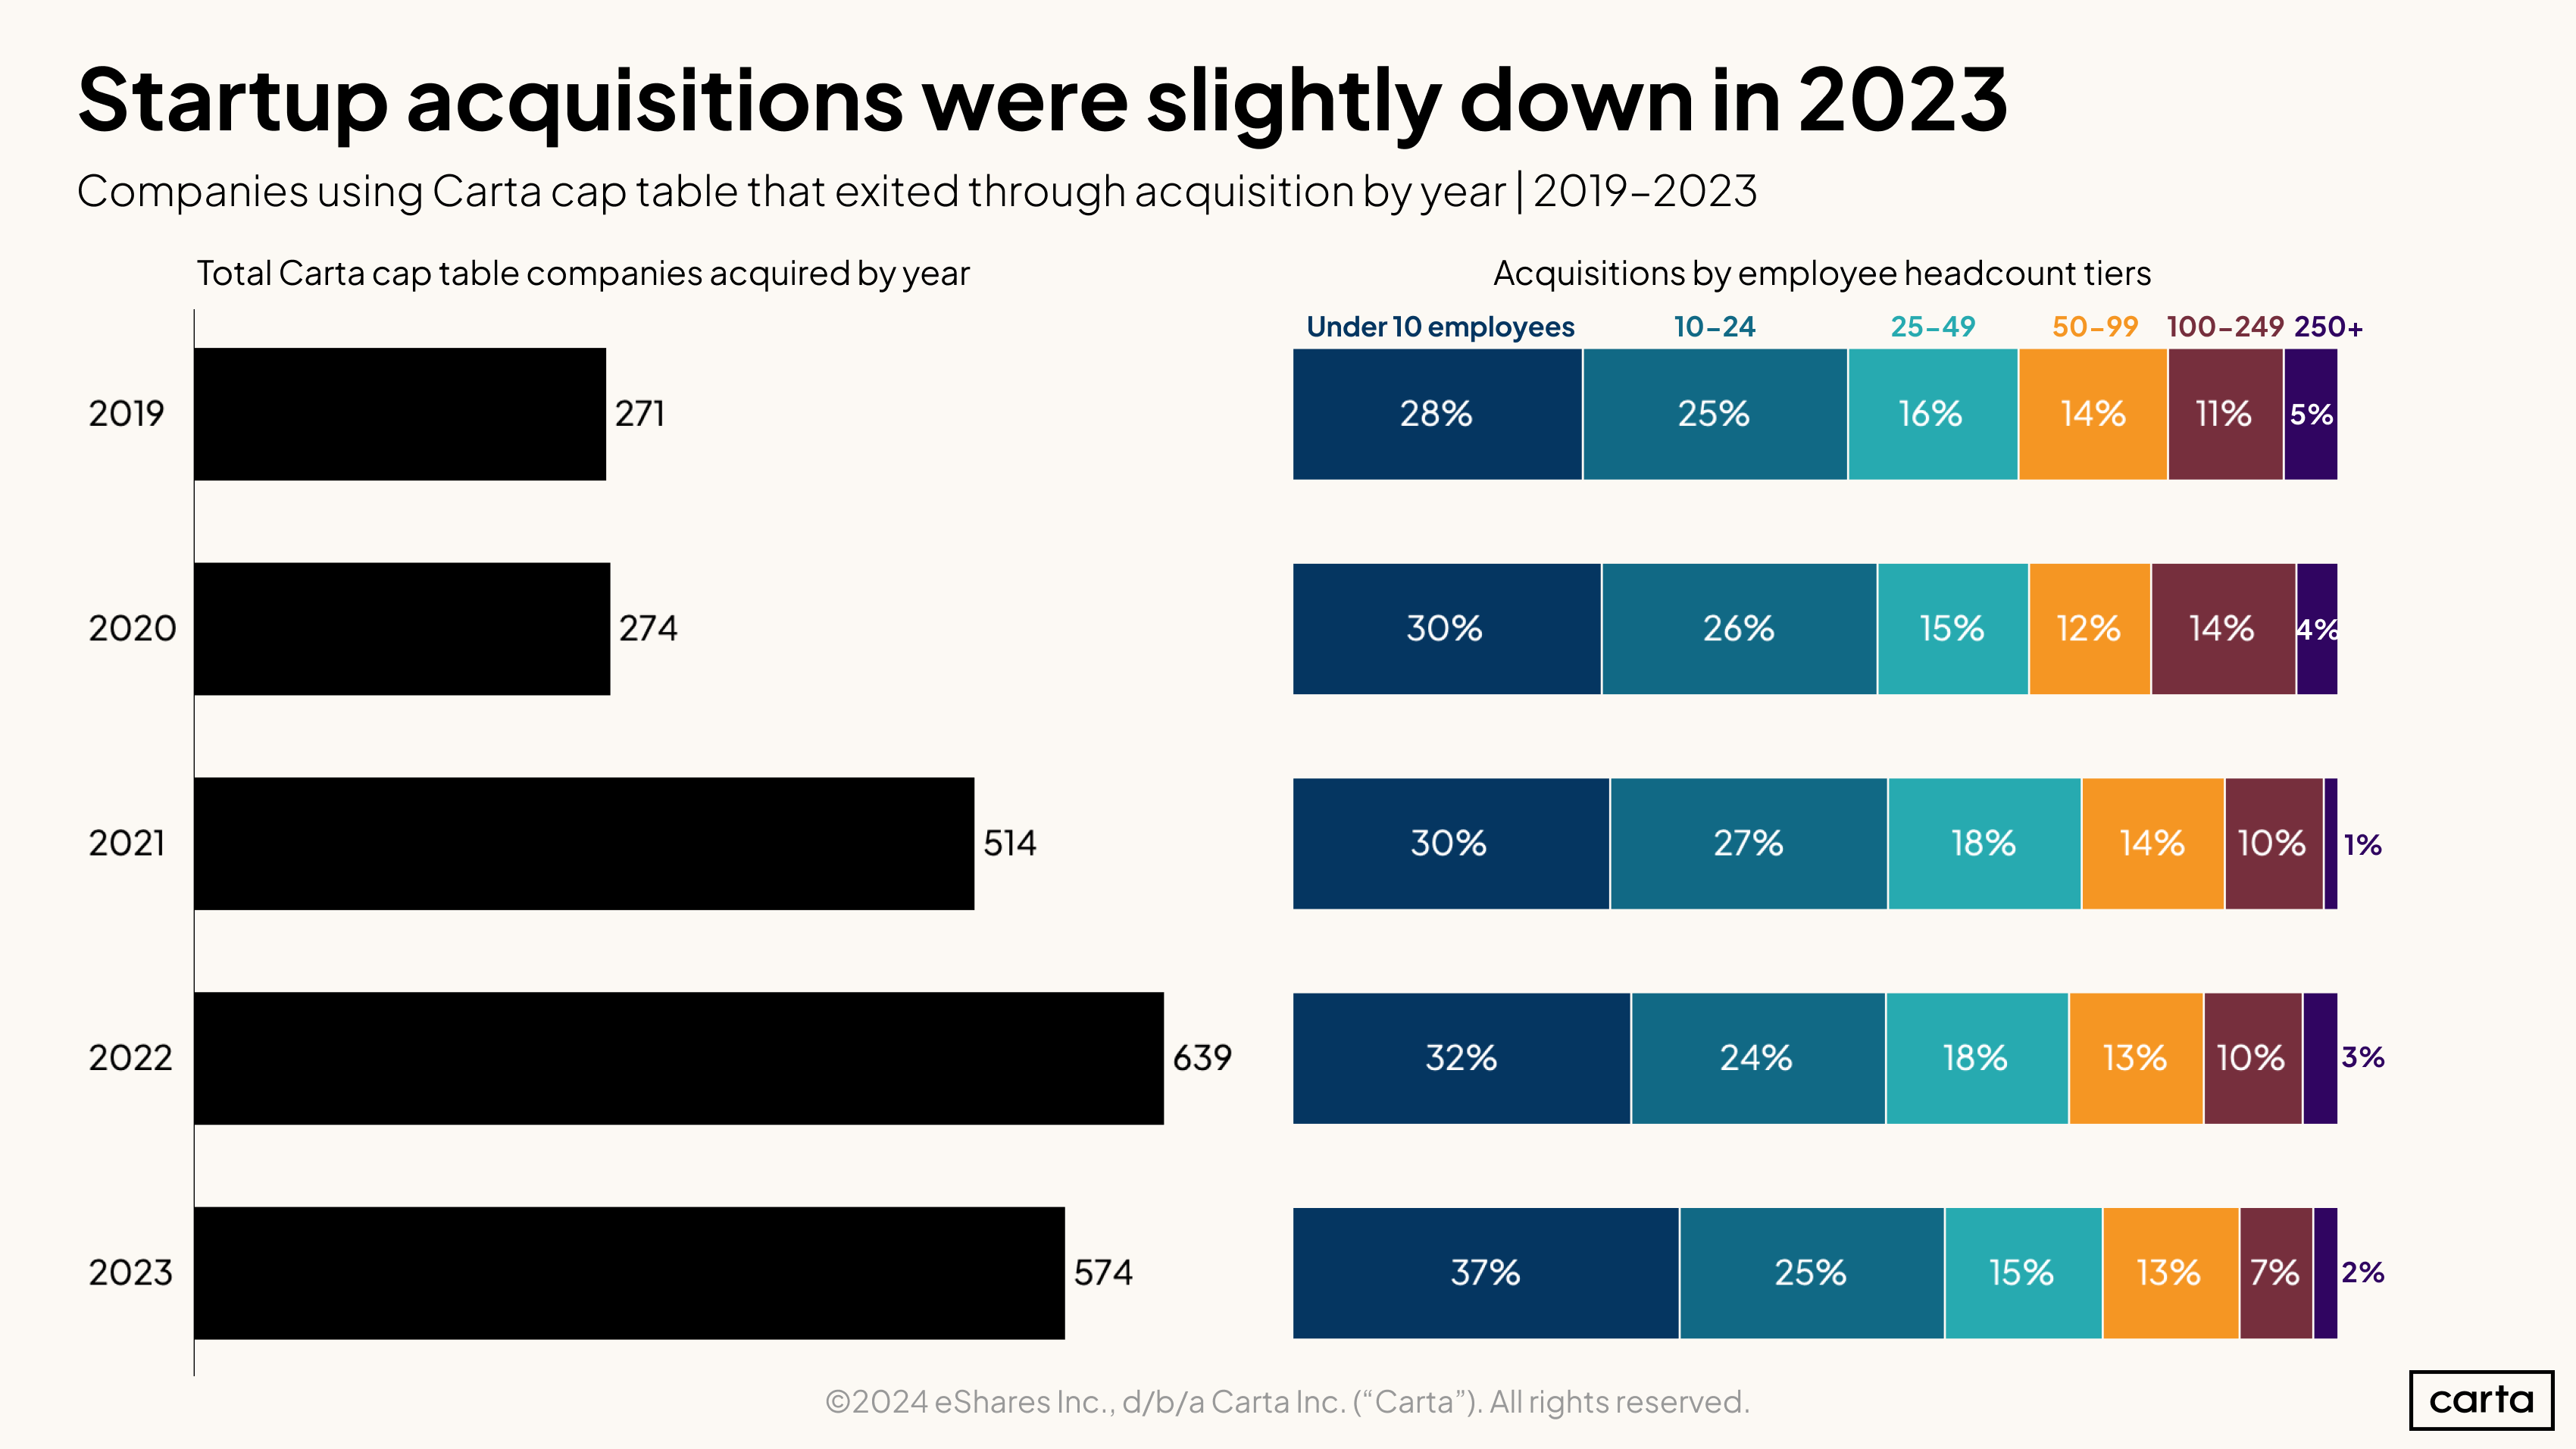 Startup acquisitions were slightly down in 2023